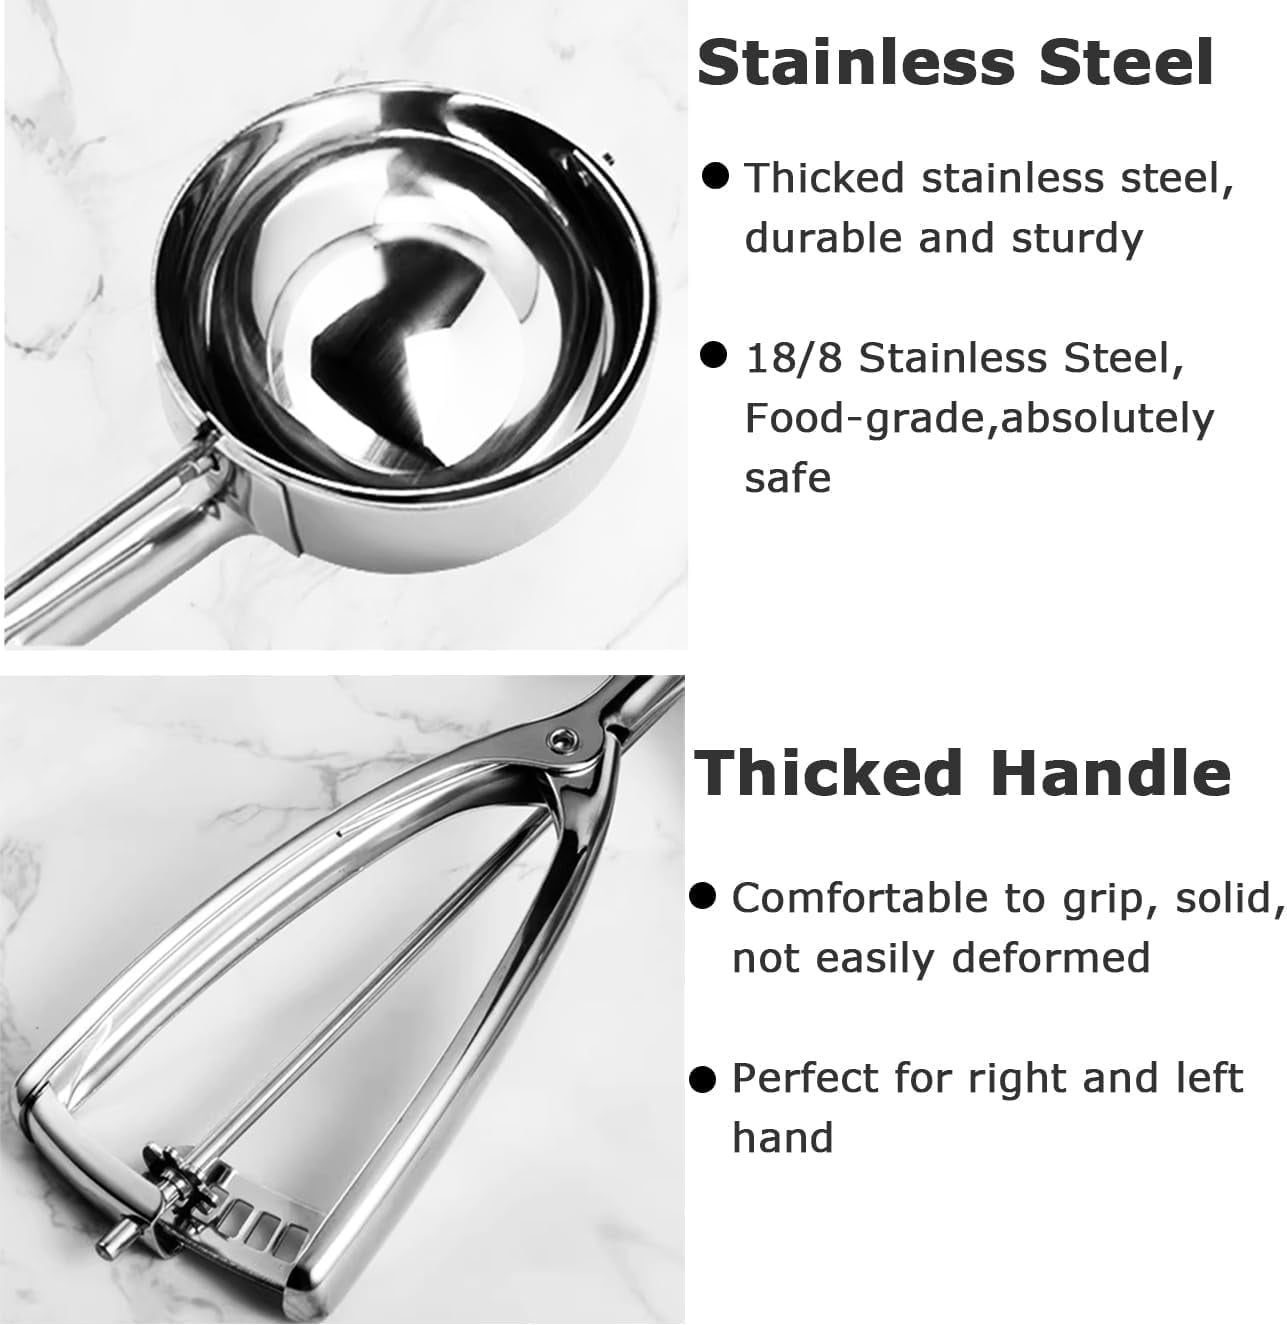 Mainstays Trigger Cookie Scoop, Chrome plated steel L 8.3 x W 2.3